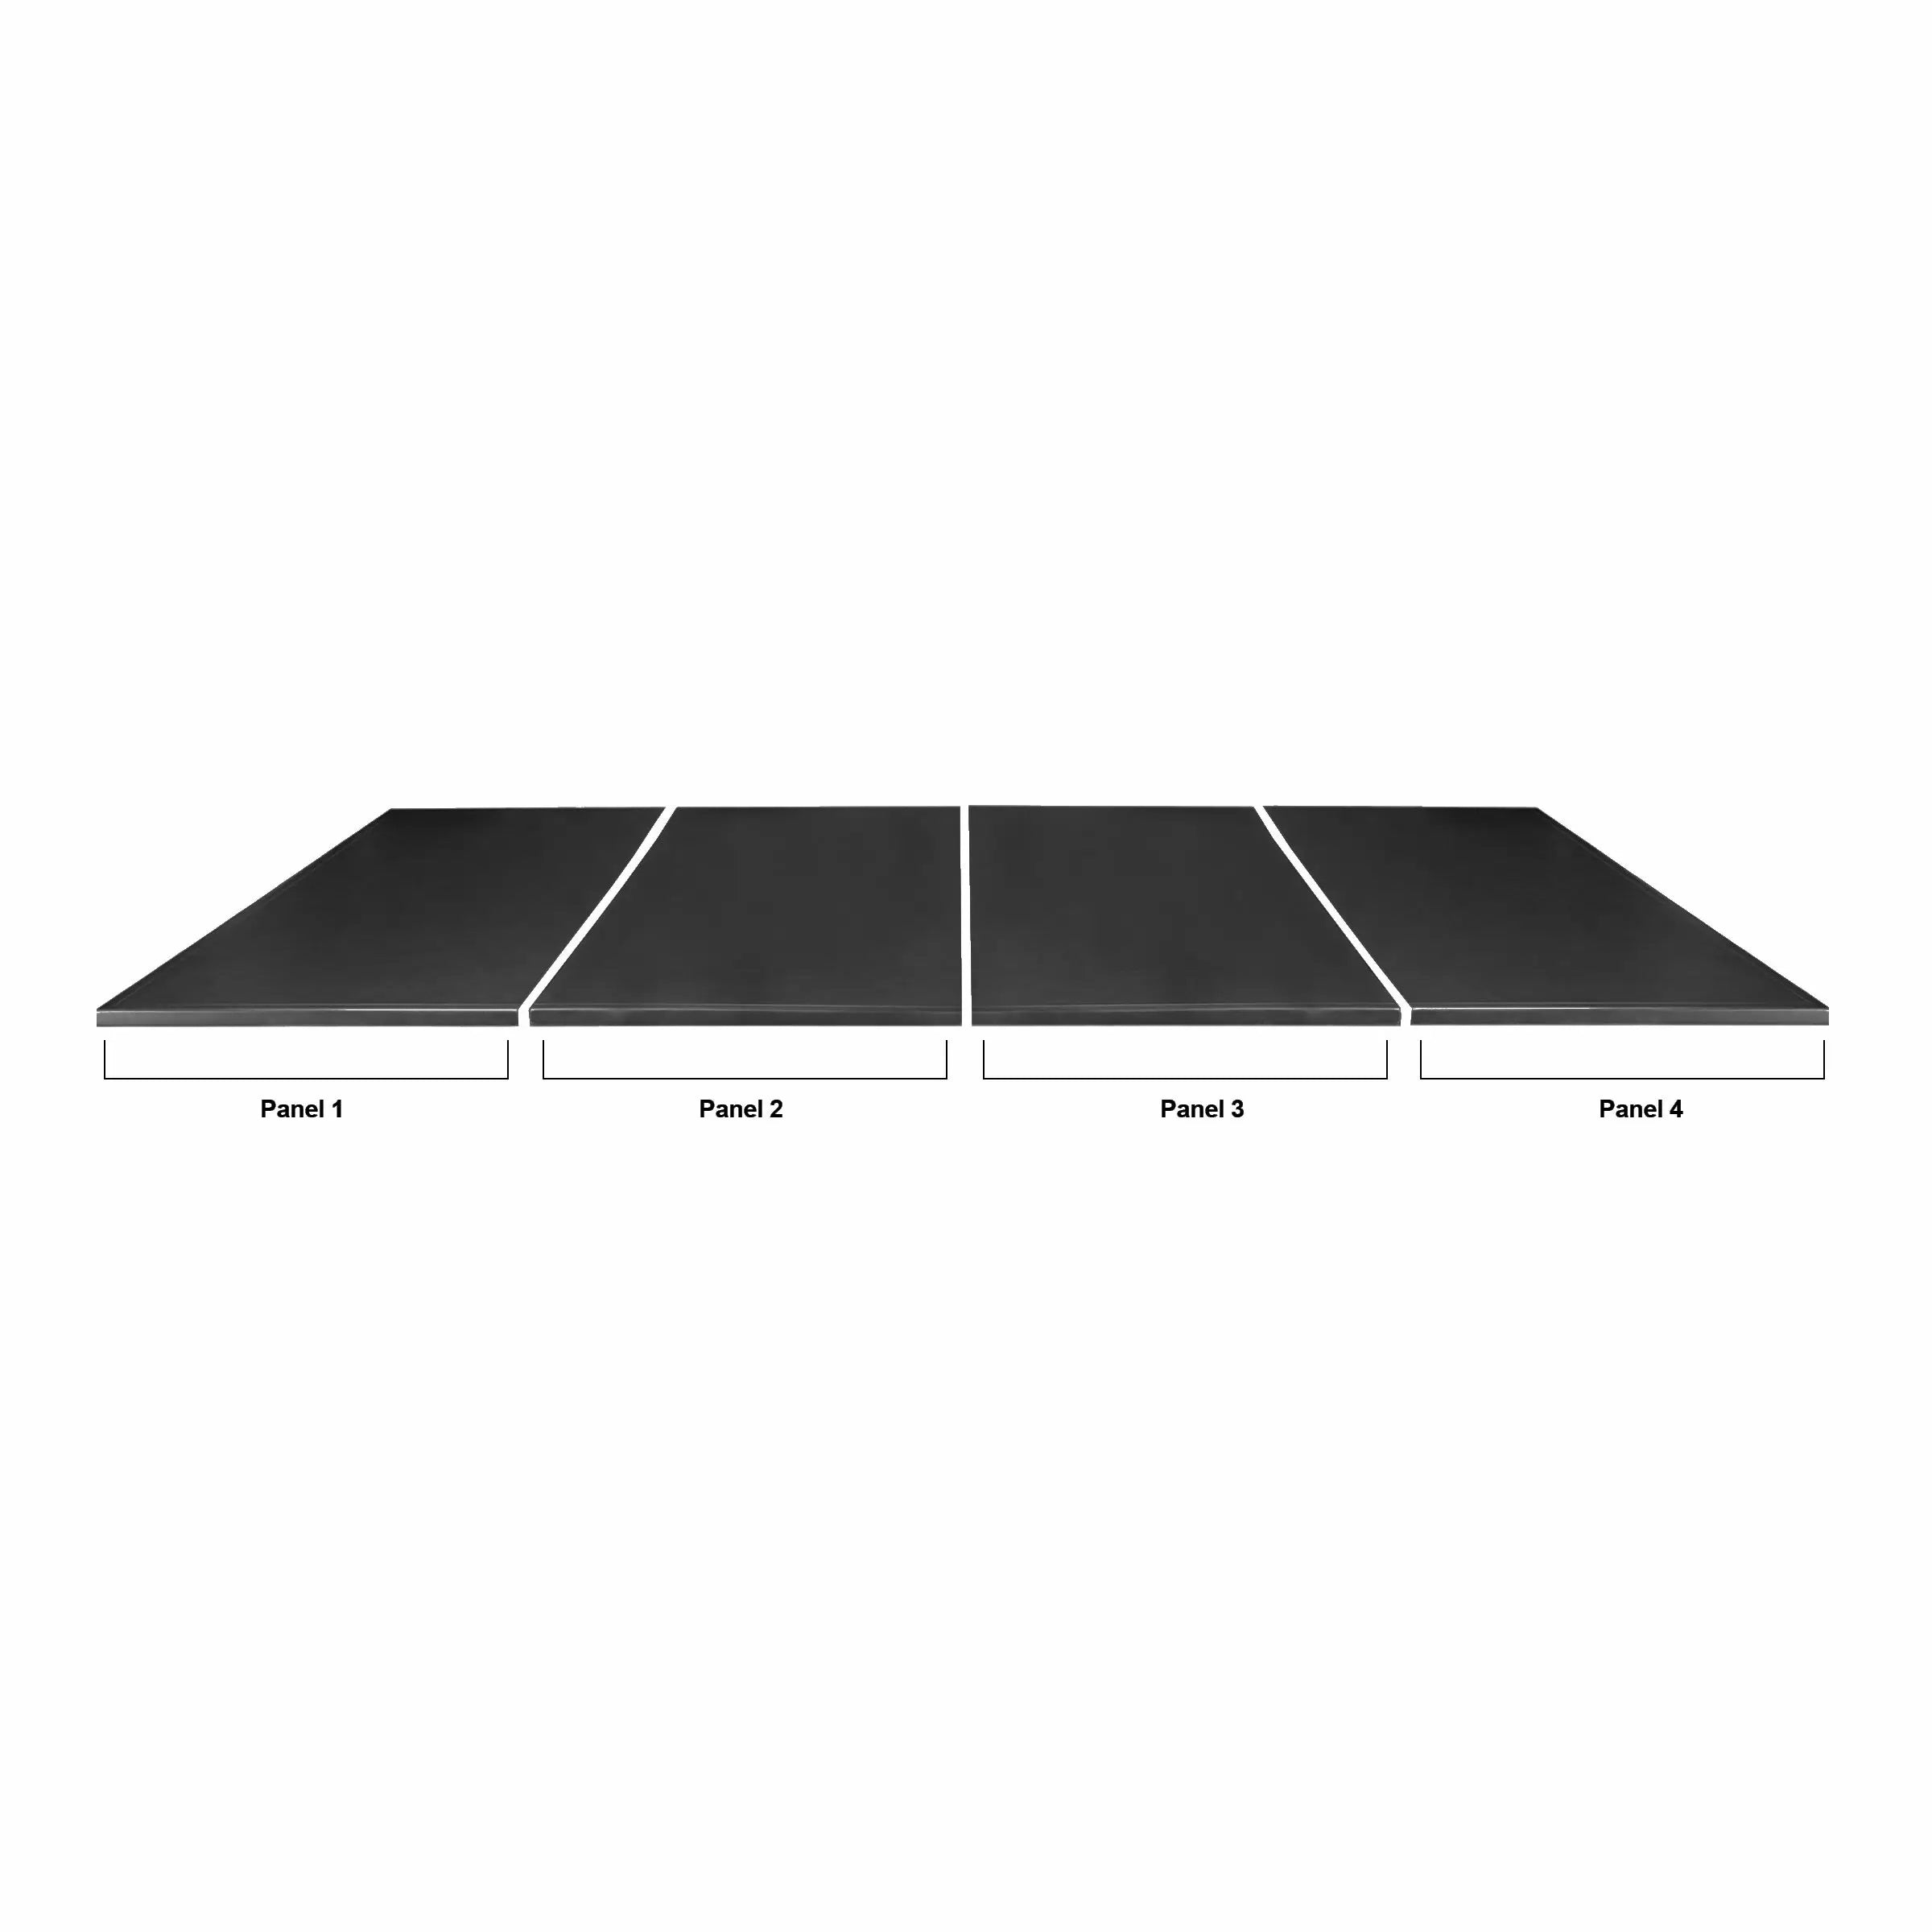 Imperial USA Conversion Dining Top - Black